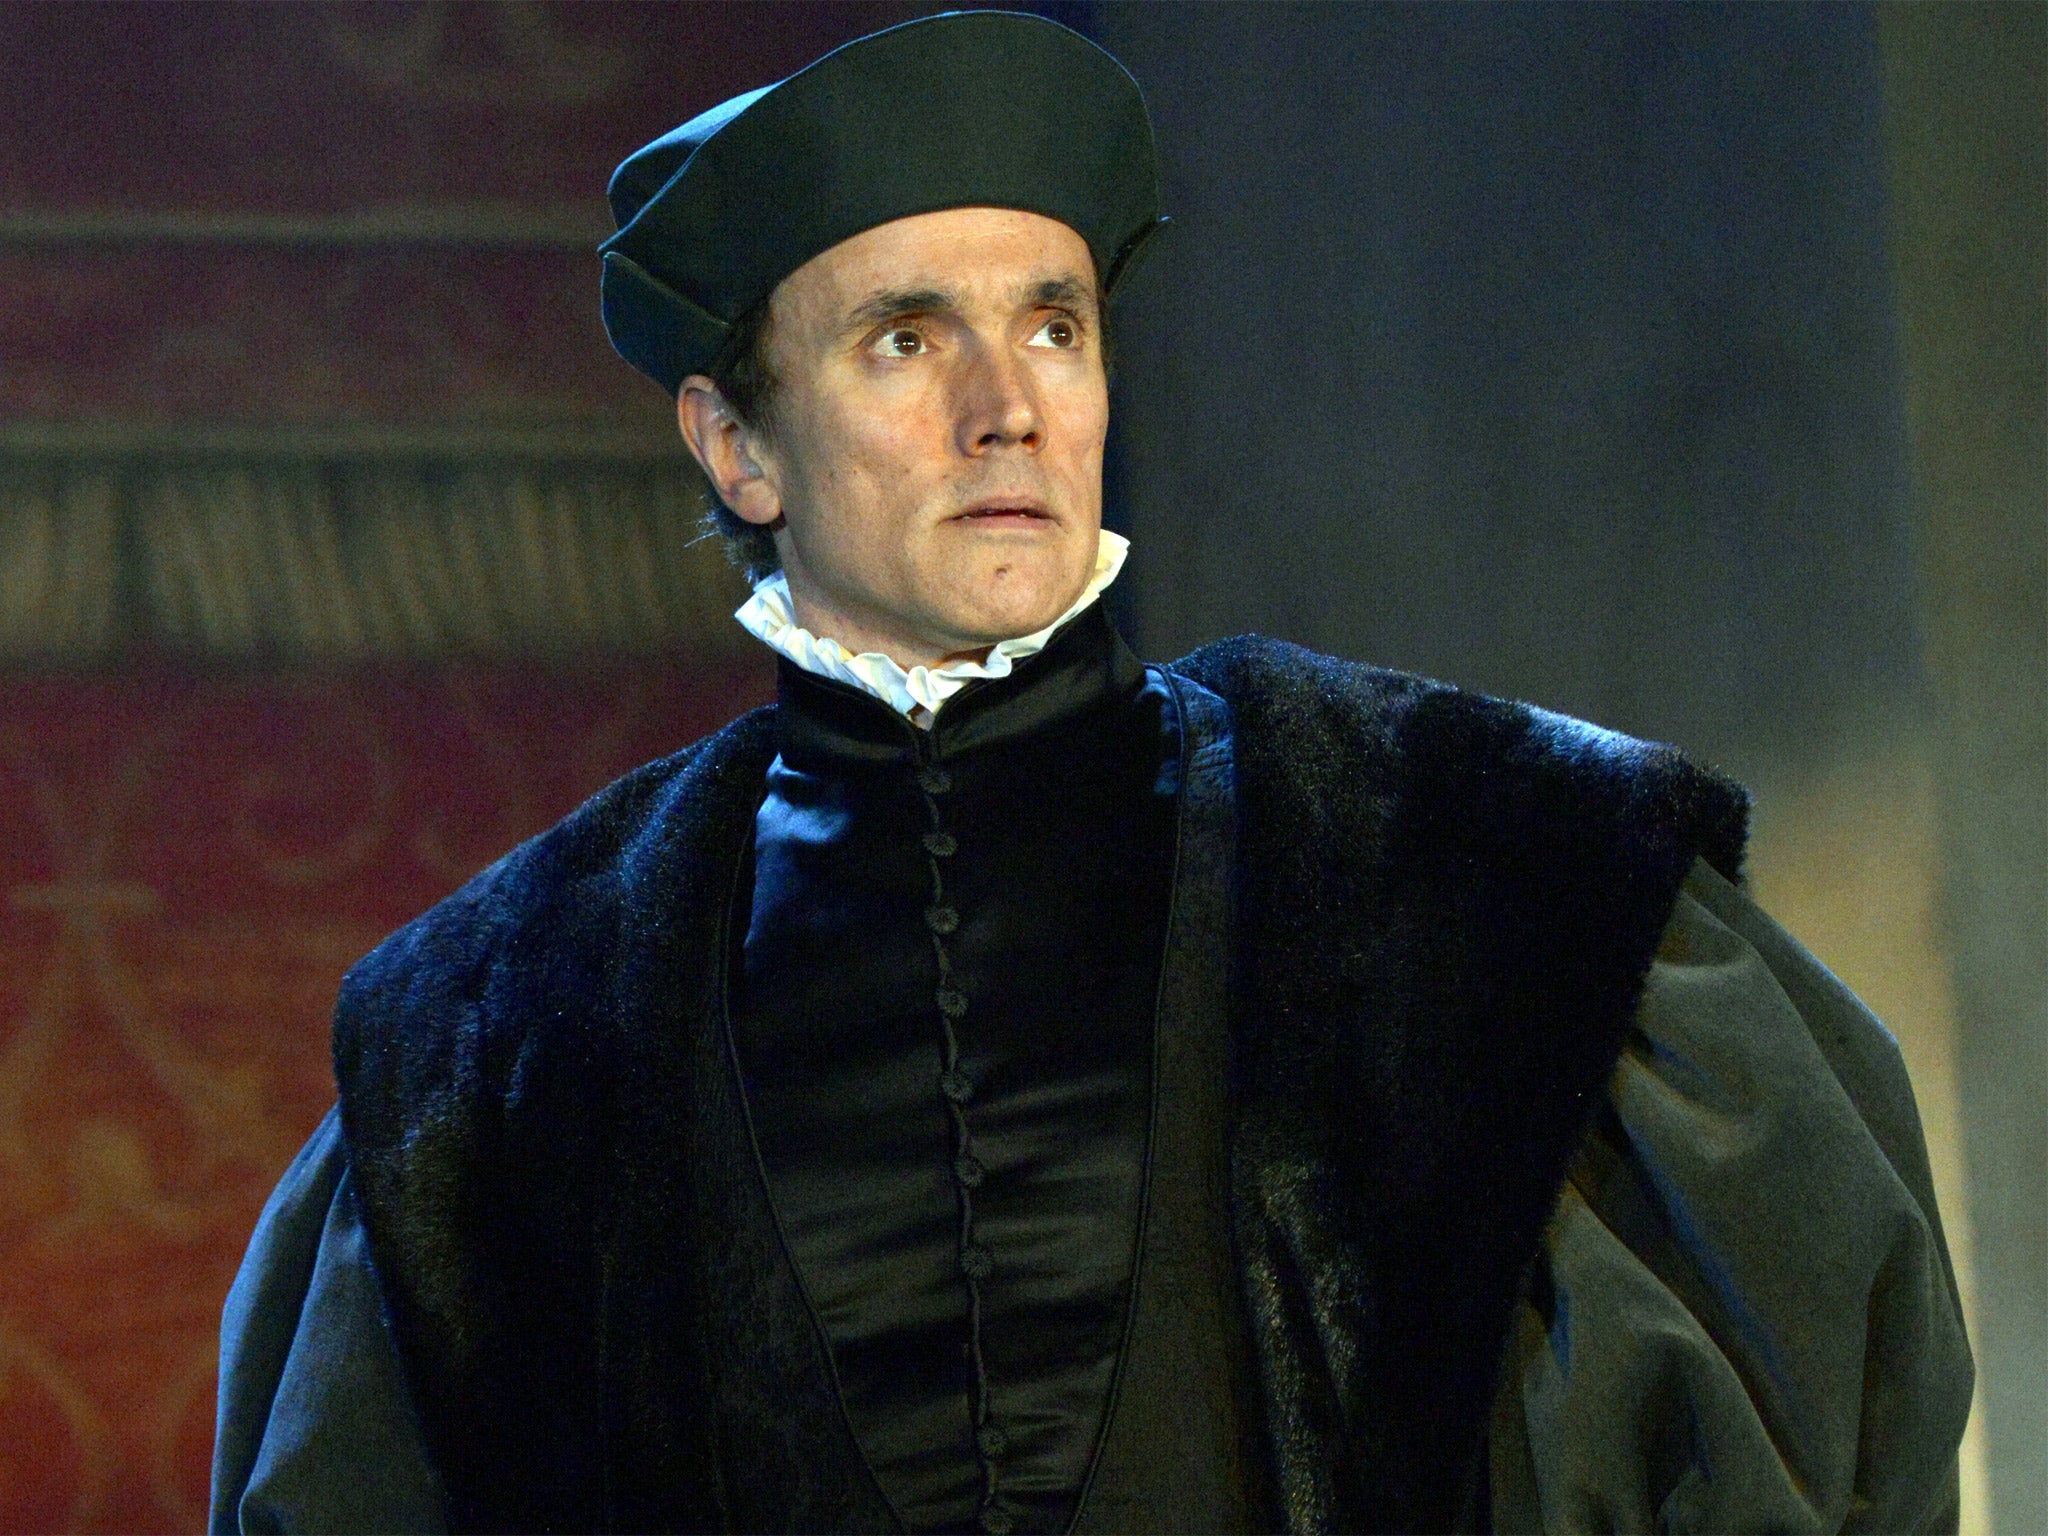 Ben Miles as Thomas Cromwell in the stage adaptation of ‘Bring Up the Bodies’ by Hilary Mantel